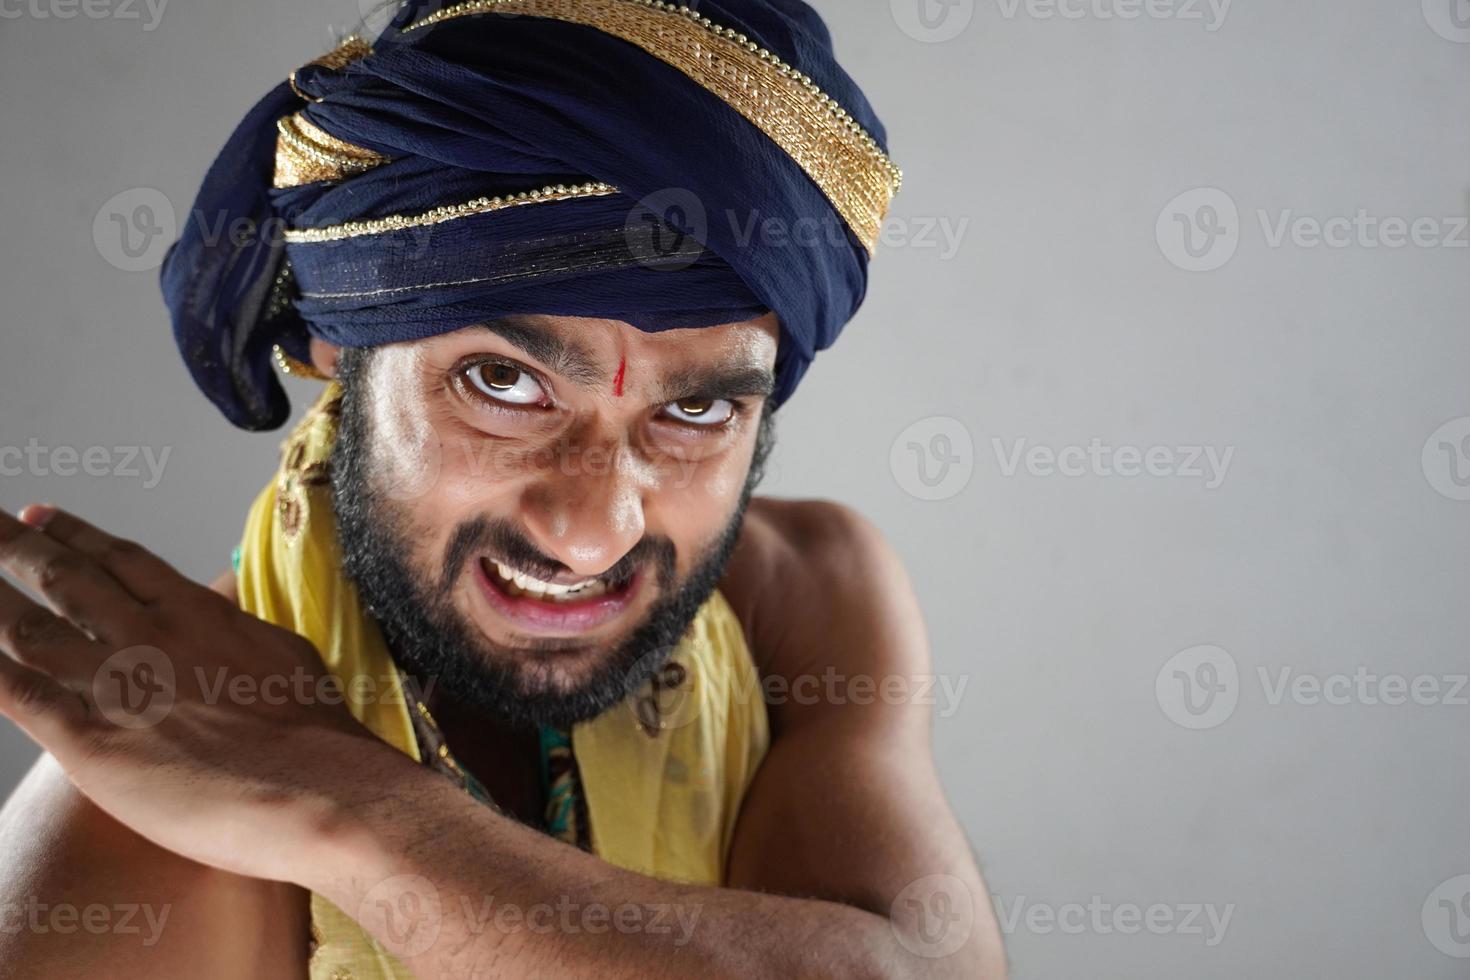 winner king images - indian man in Theater acting as a king photo